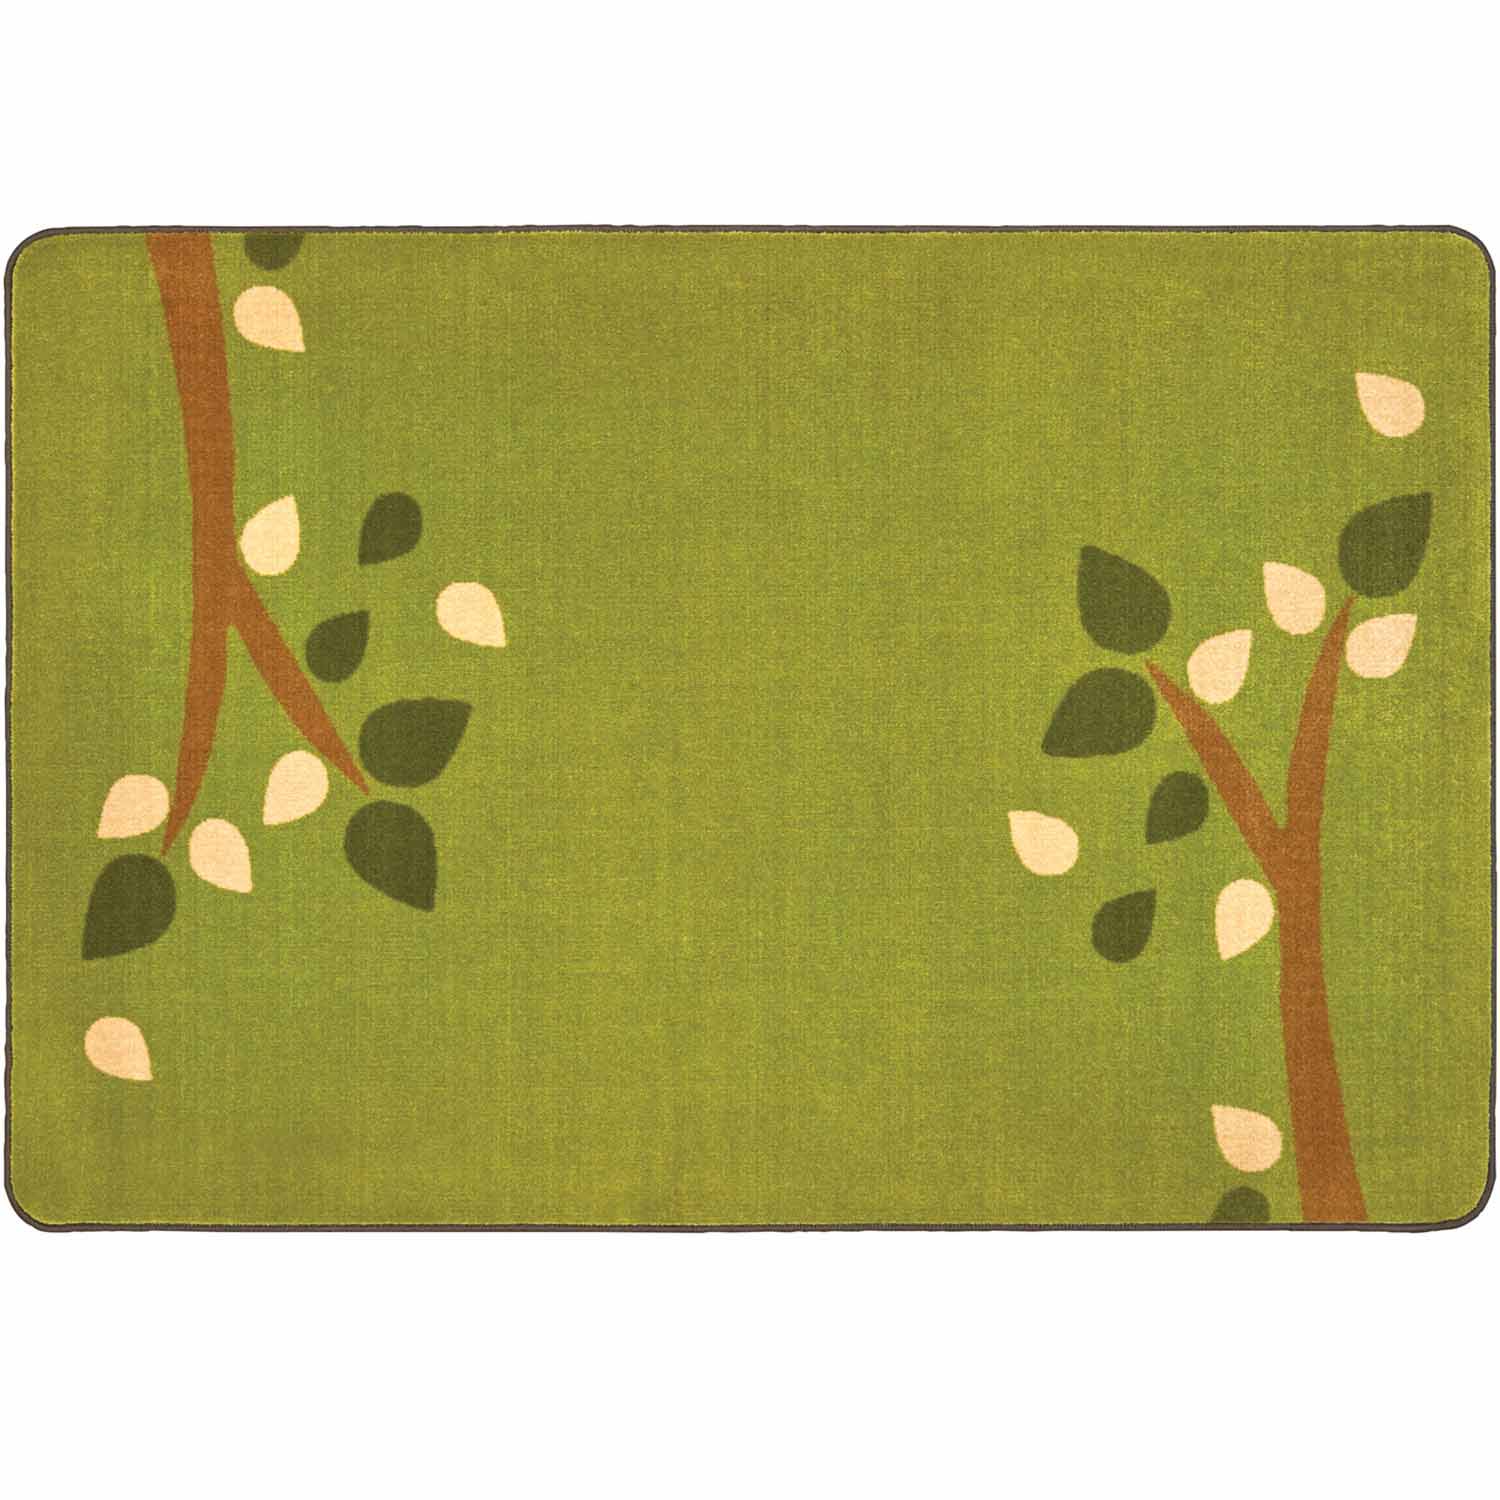 KIDSoft™ Branching Out Rug Green Rectangle 7' 6" x 12'